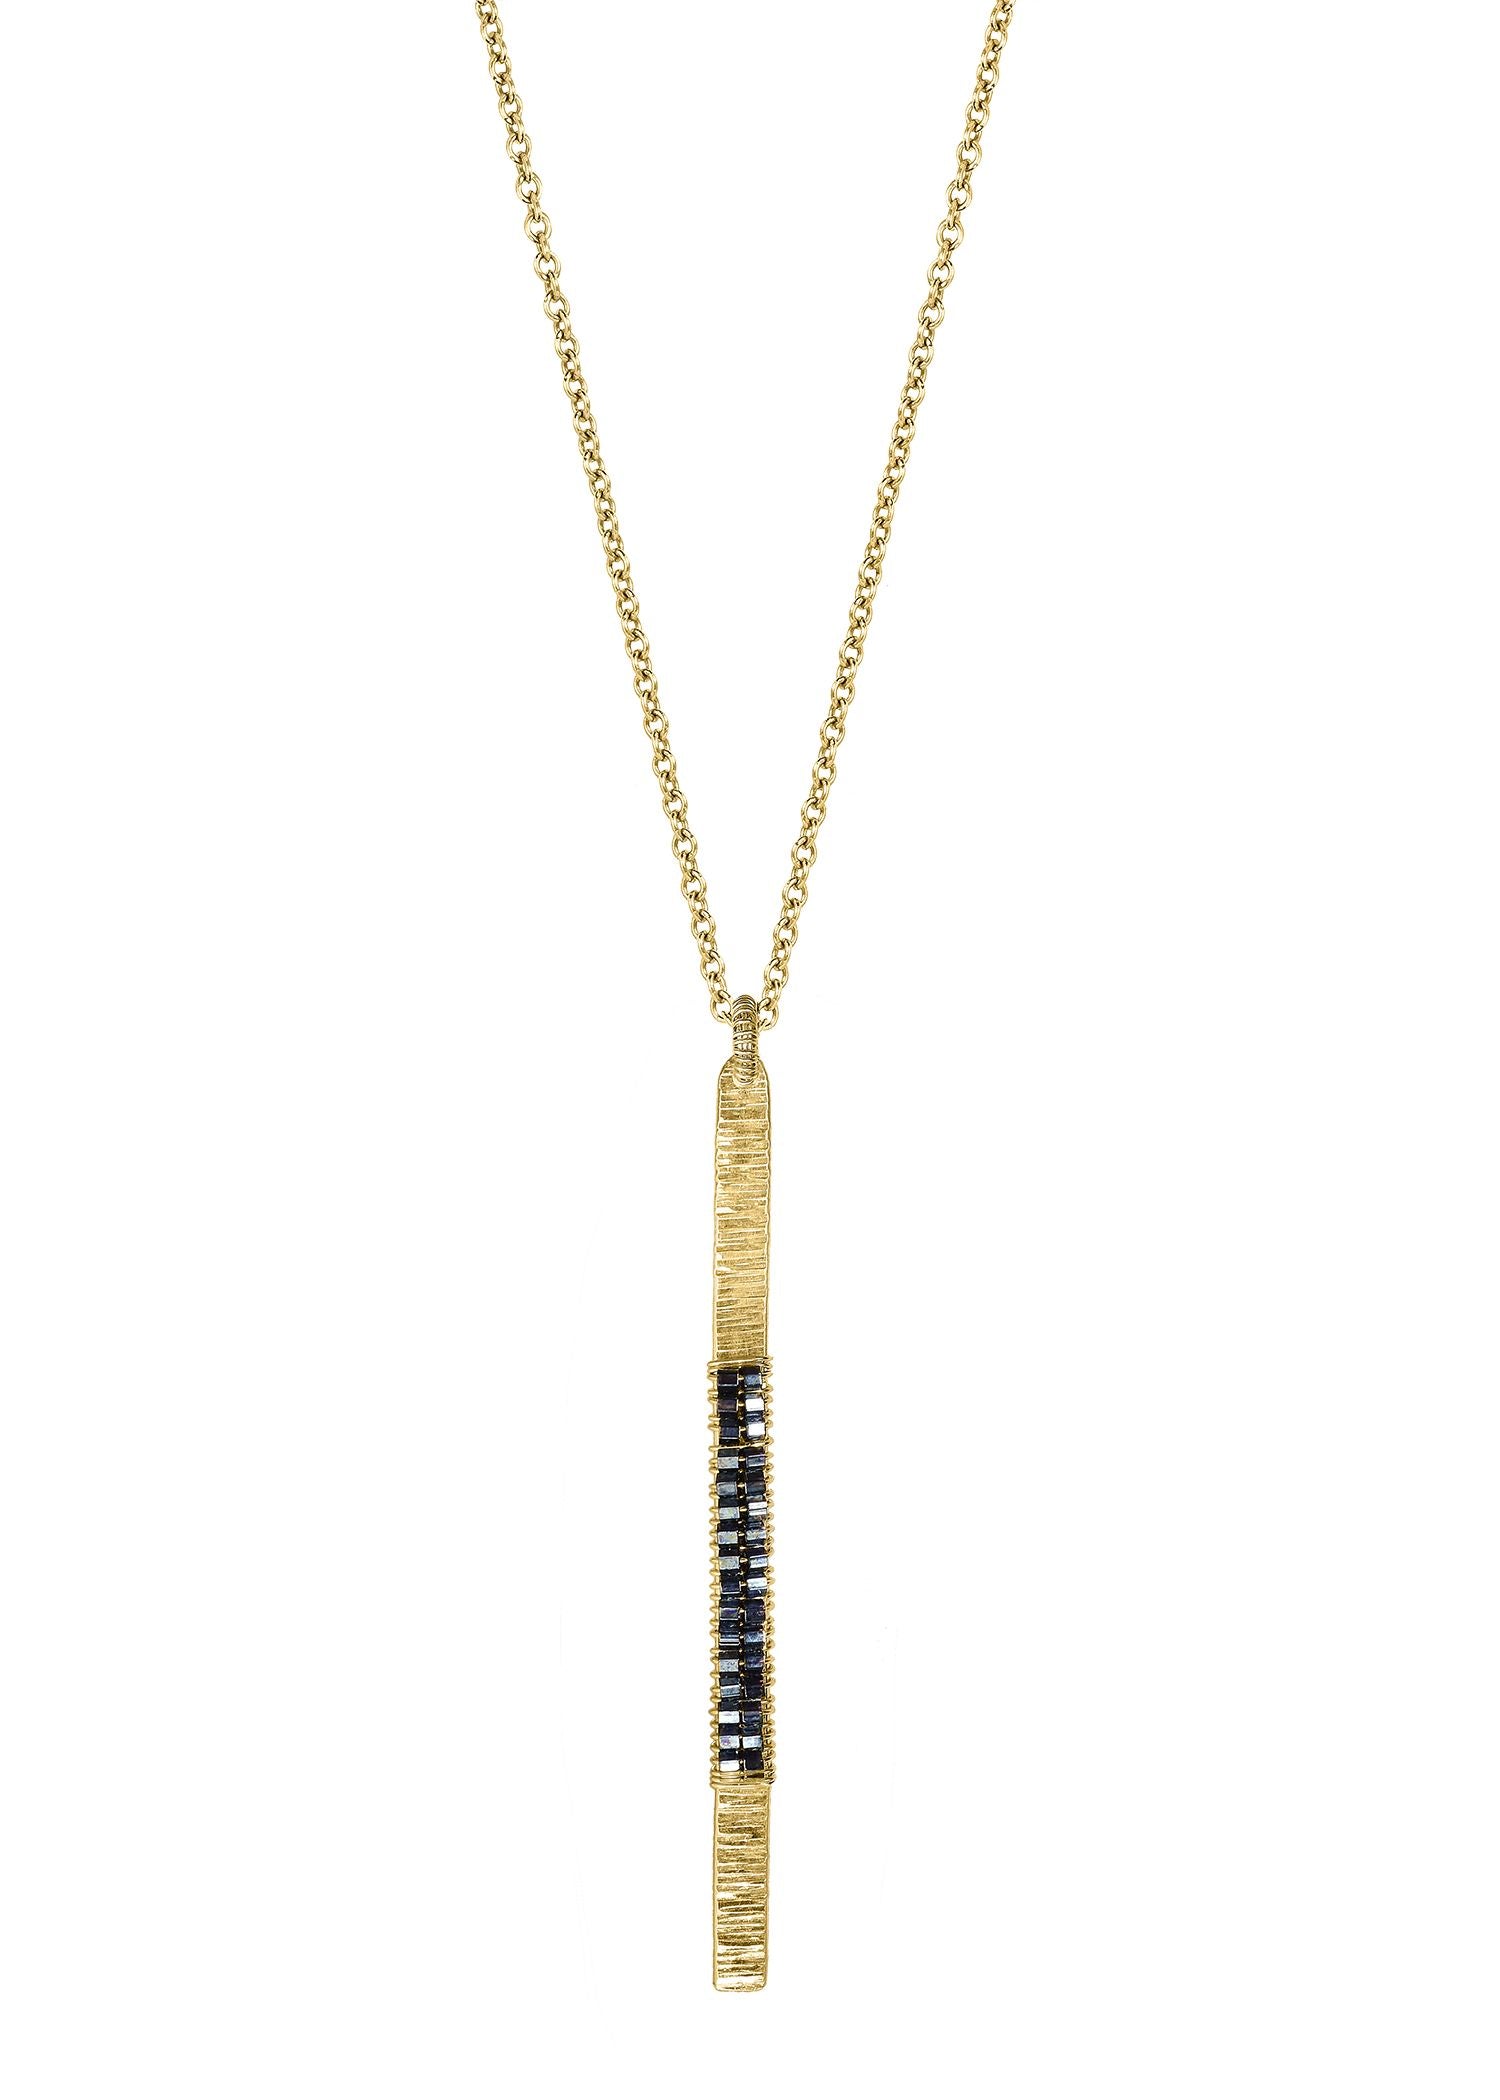 Dark hematite seed beads 14k gold fill Necklace measures 16-1/2" in length Pendant measures 2 in length and 1/8" in width Handmade in our Los Angeles studio